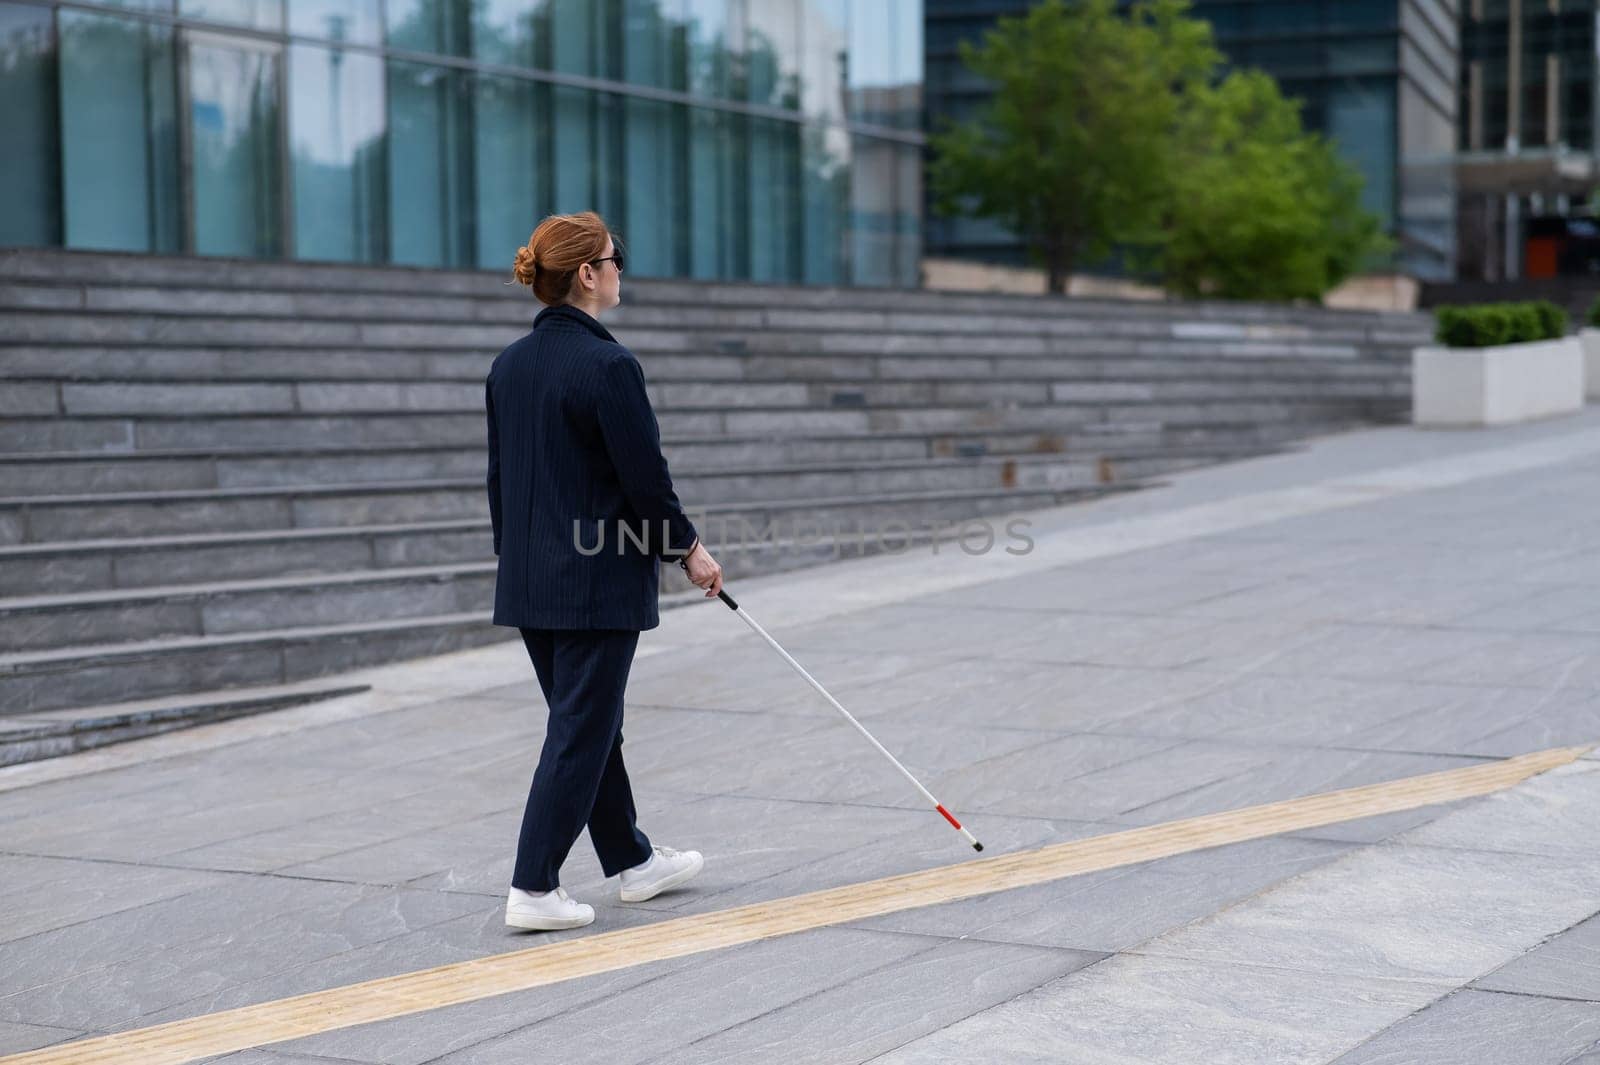 Blind businesswoman walking along tactile tiles with a cane. by mrwed54